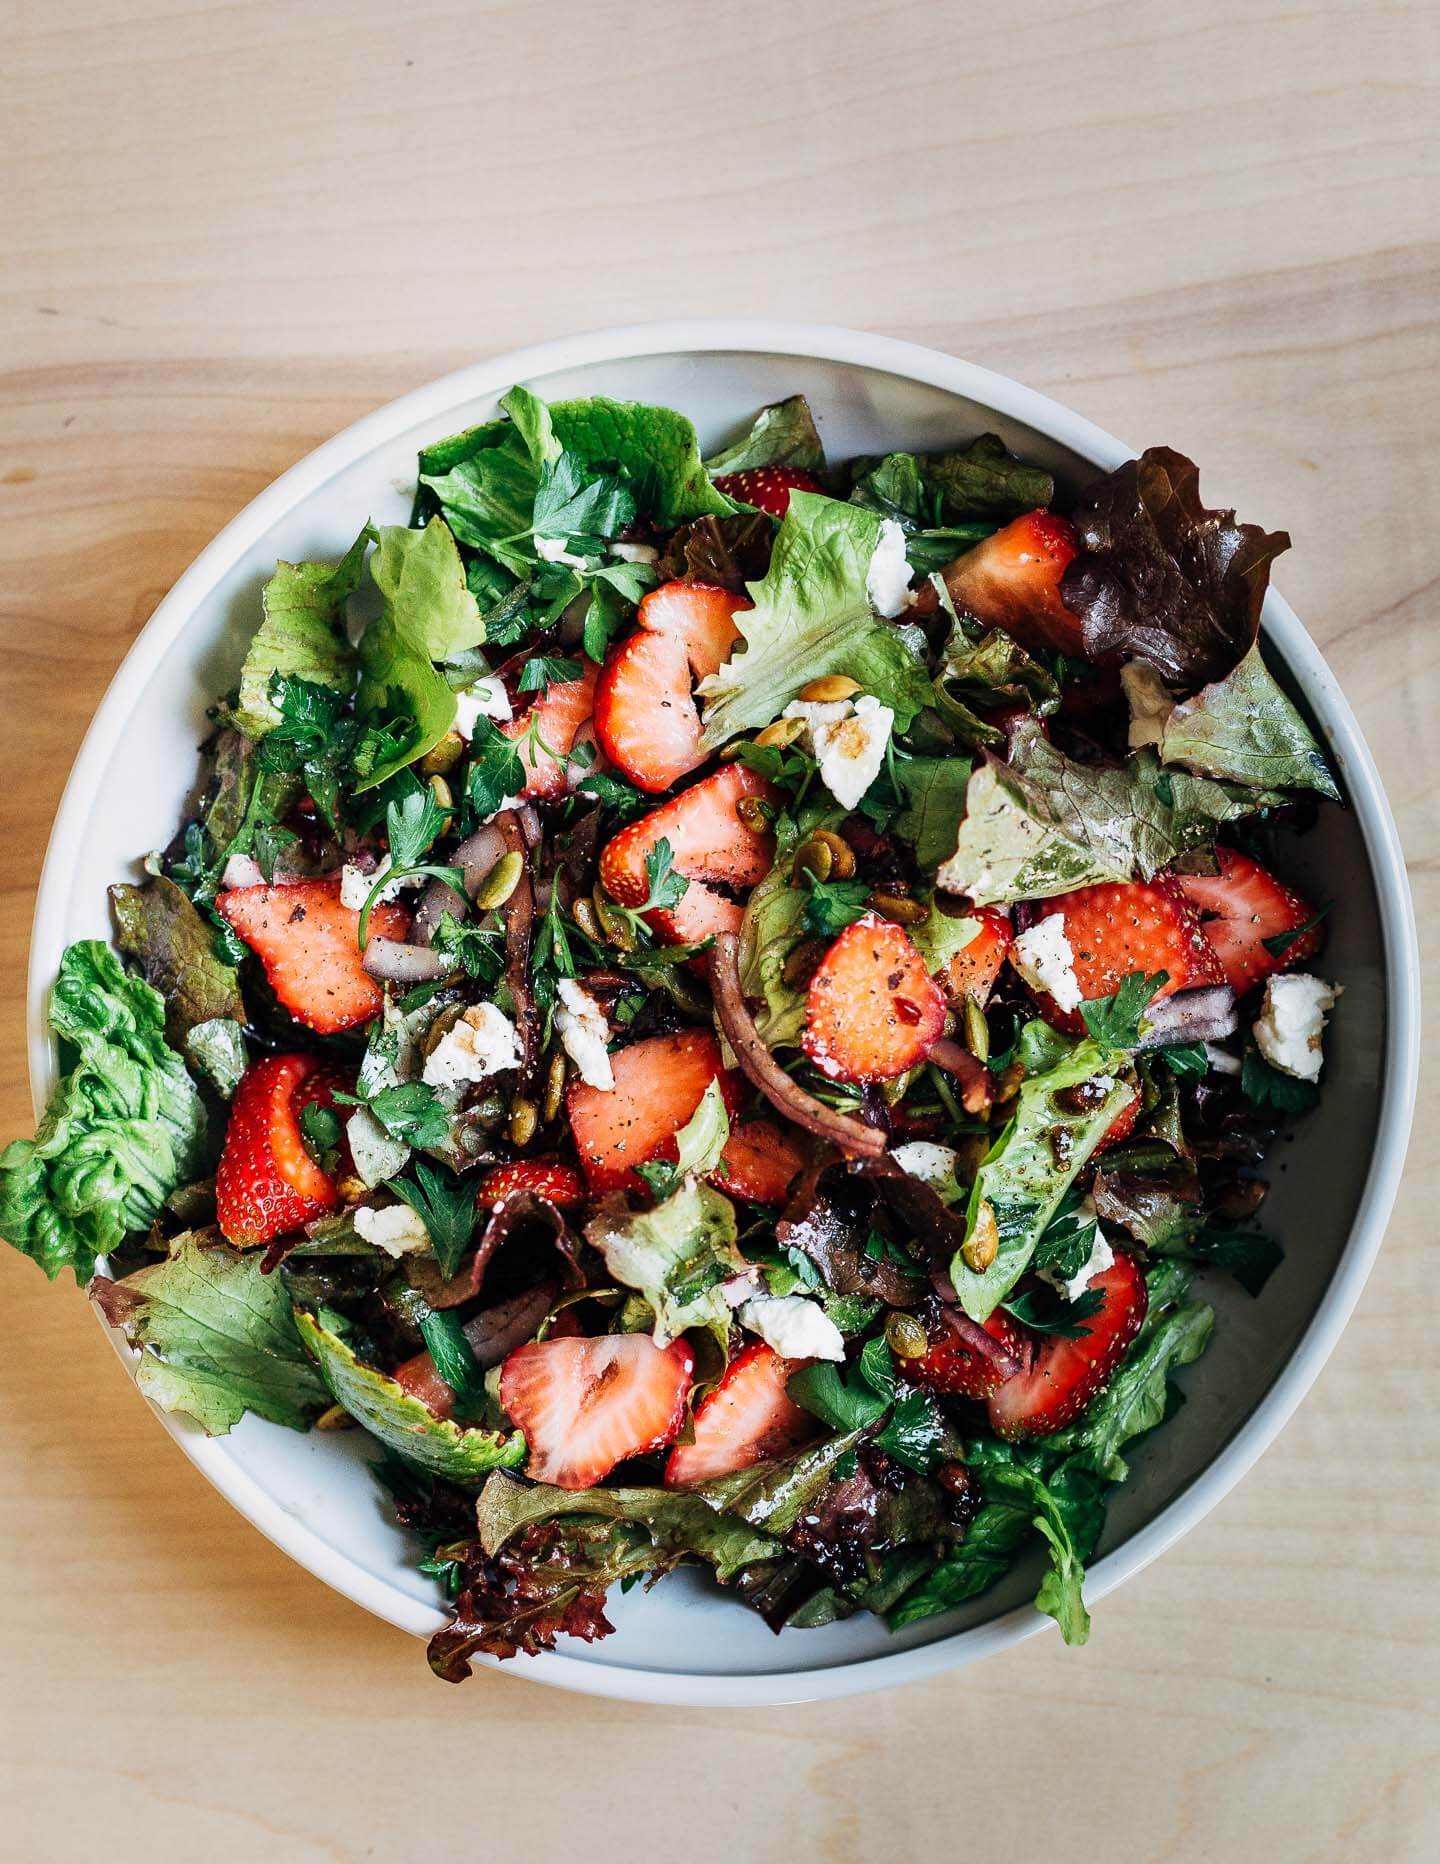 A shallow bowl filled with lettuces, strawberries, and salad other toppings. 